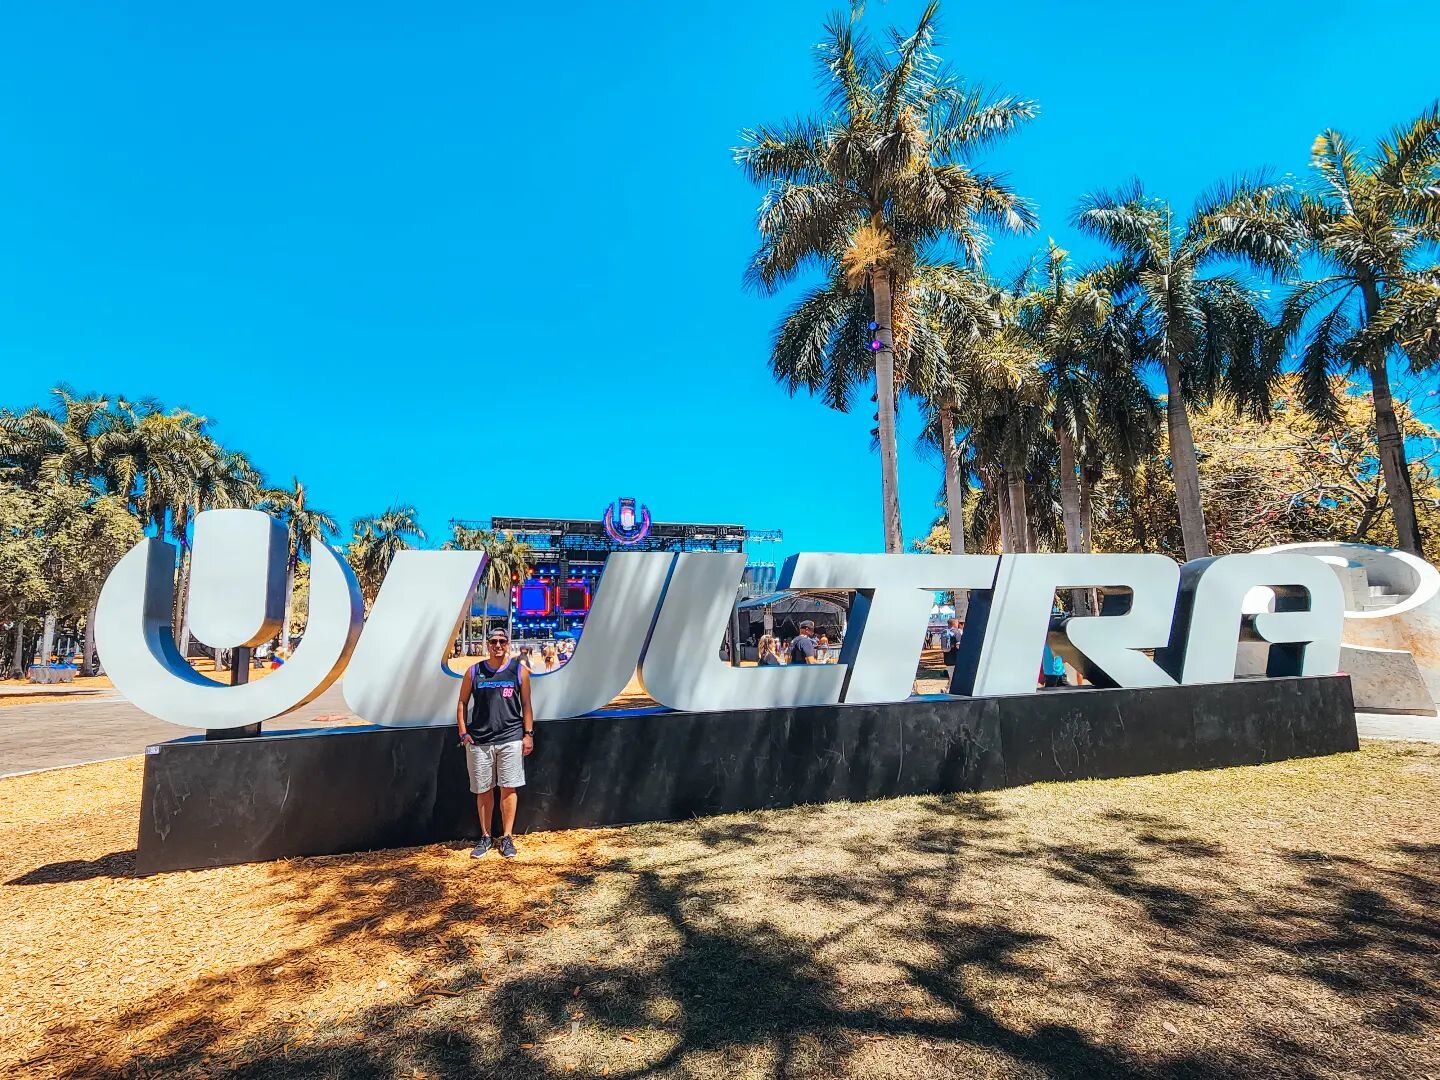 Always a great time at Ultra 🙌
.
.
.
#ultra #umf #ultramusicfestival